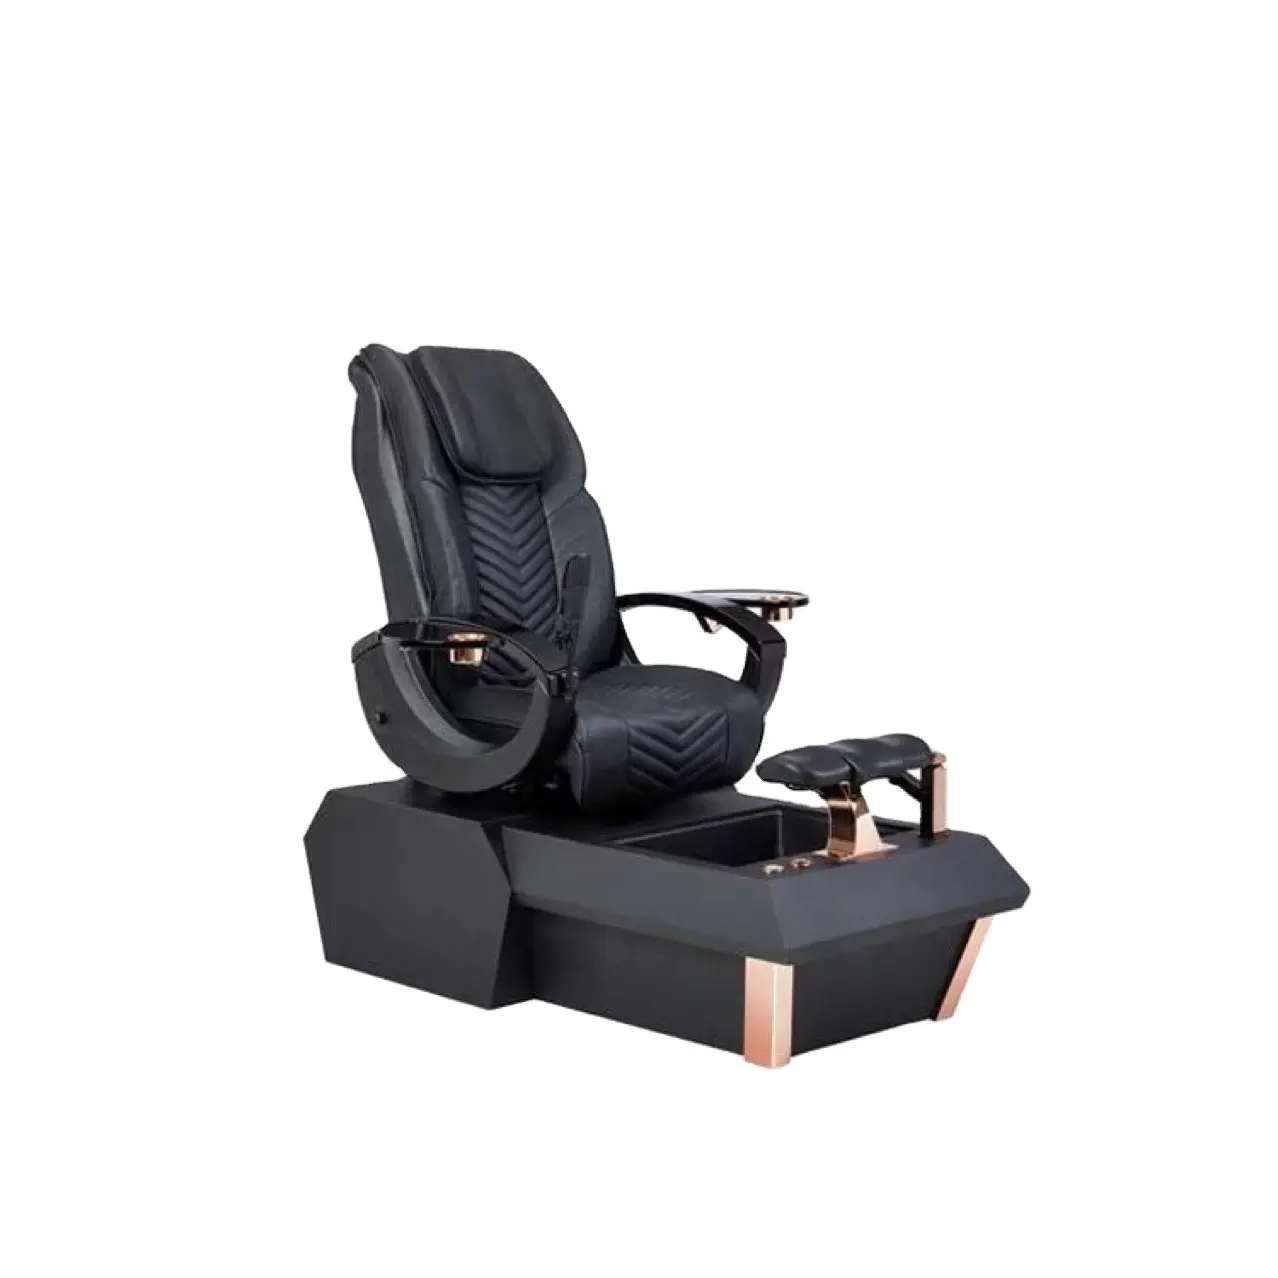 Luxury Salon Foot Spa Pedicure Chair Reclining Beauty Spa Electric Pedicure Chair With Remote Control